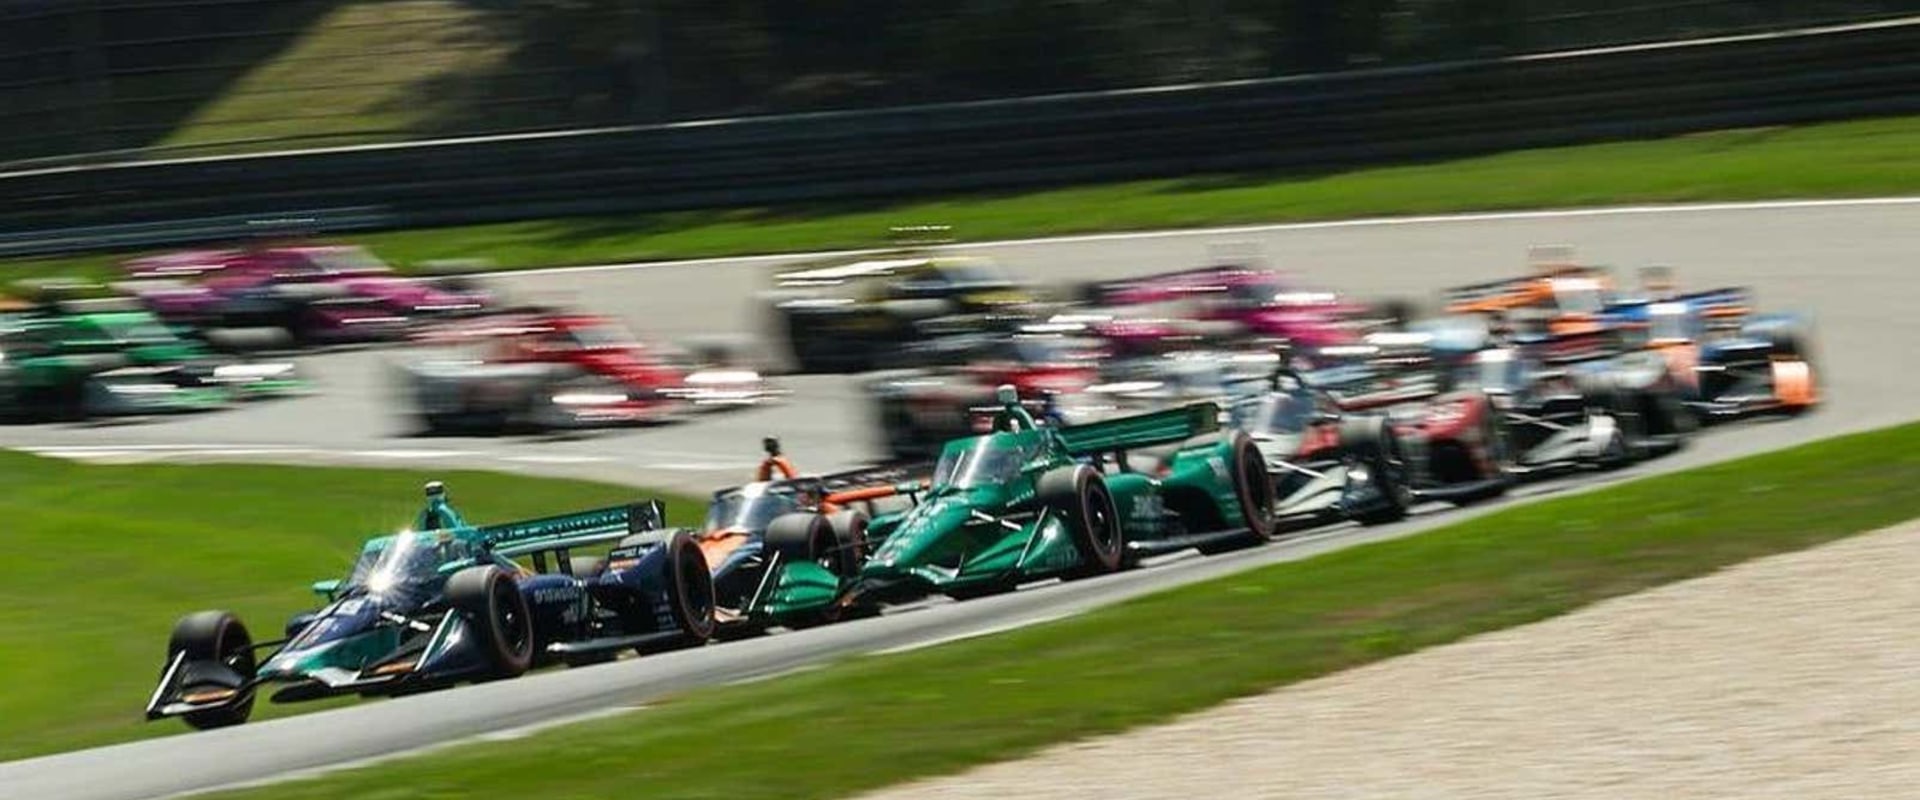 Racing Cars: An Introduction to Indy Cars